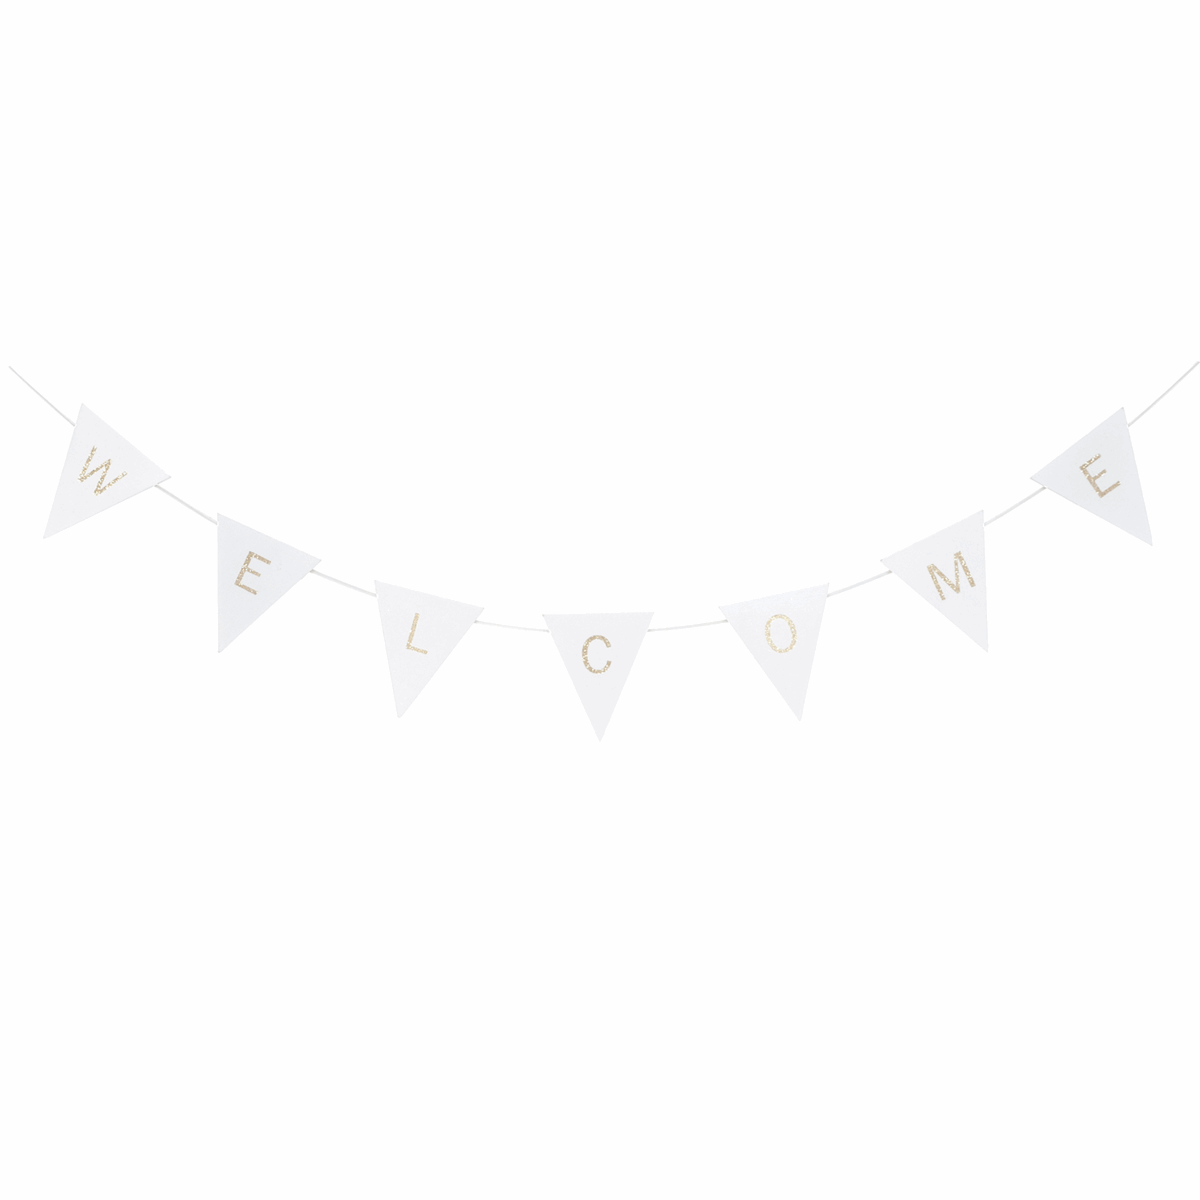 Welcome Bunting - White with Gold Glitter